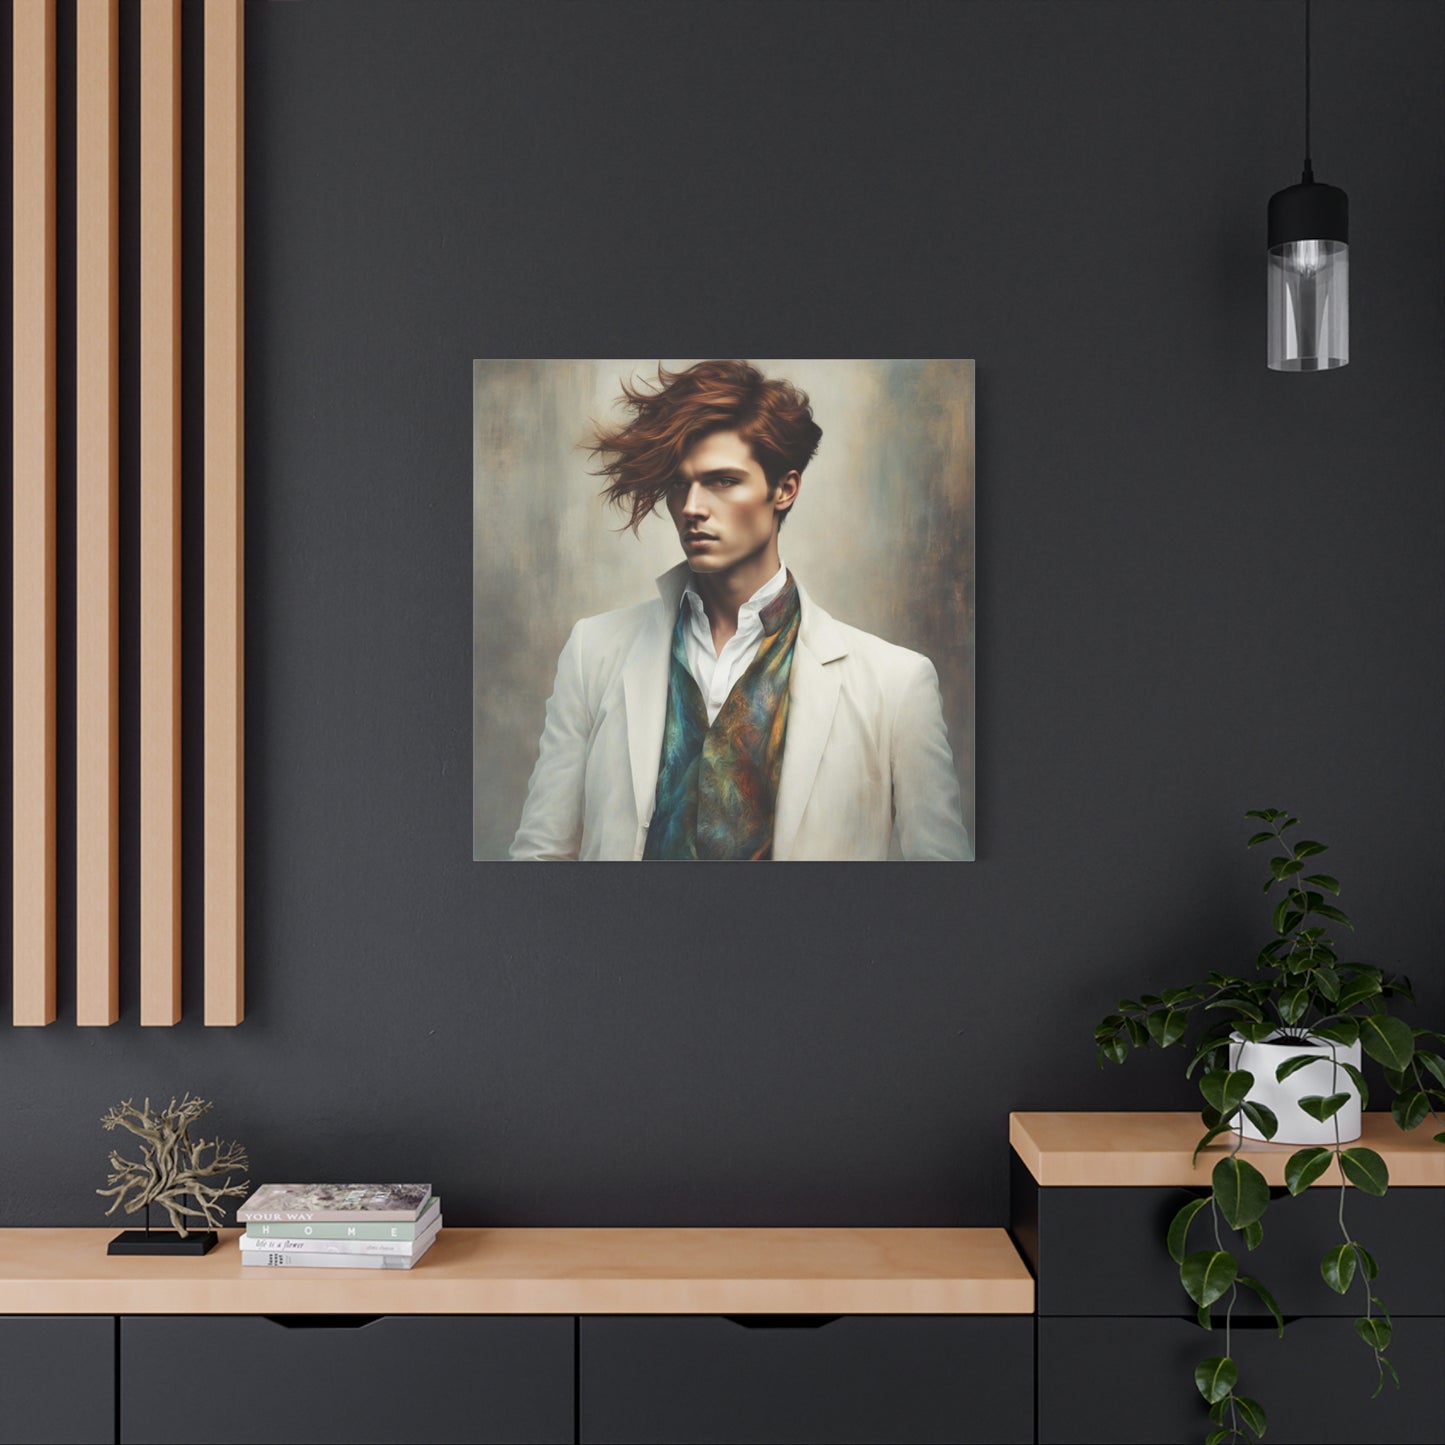 Elio - Ethereal Grace - Available in a Matte Square Canvas Print-Wall Art Decor-Androgynous Figure-High Wedding Fashion Wall Art Decor